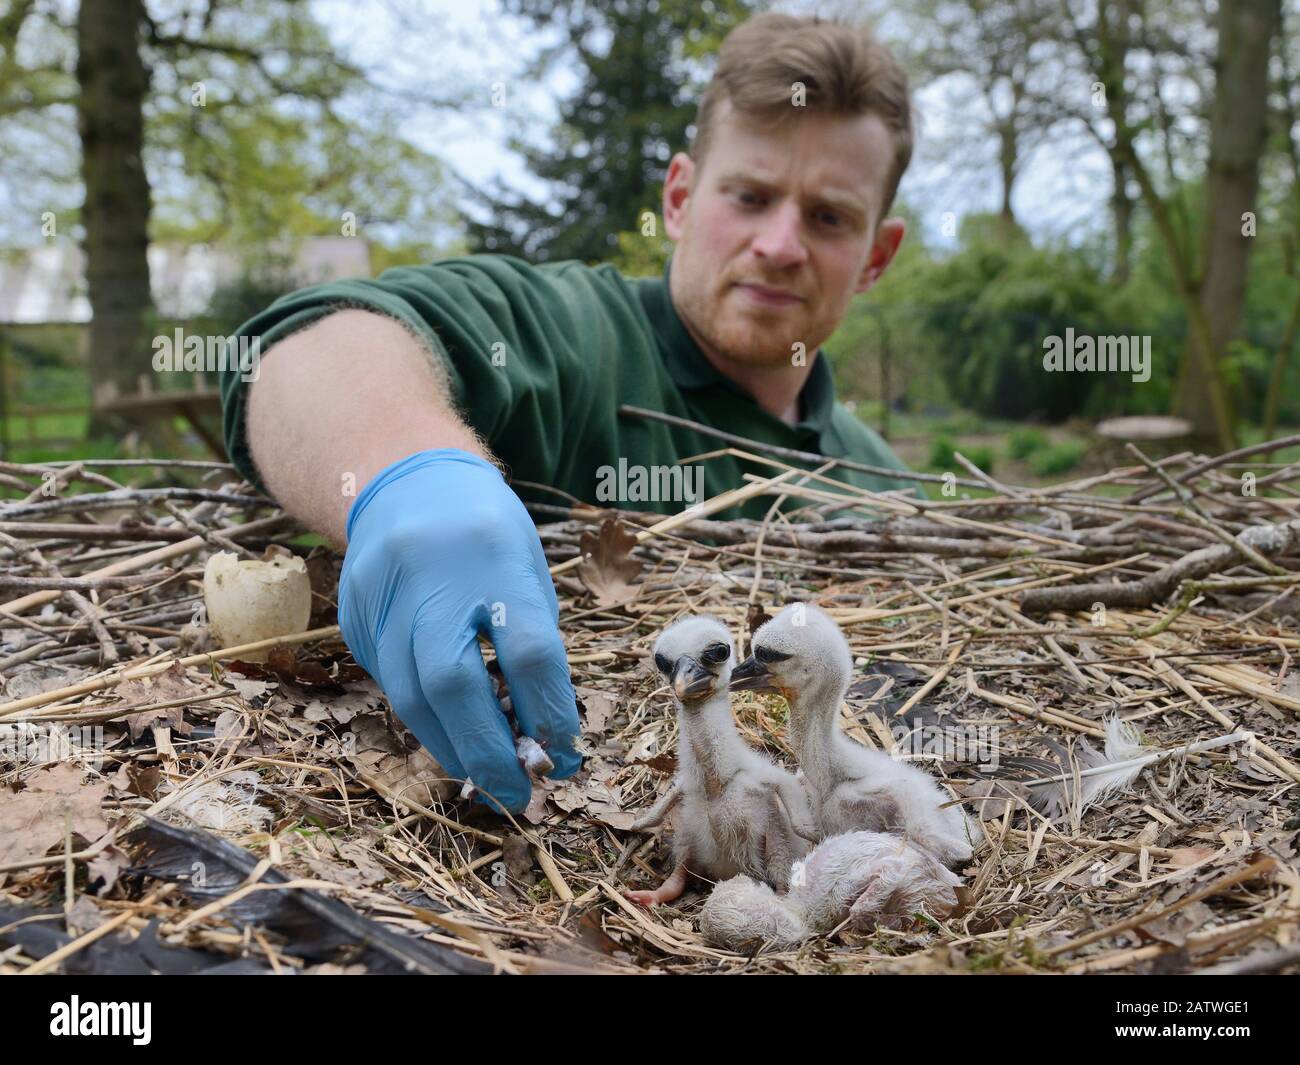 Richard Wardle feeding fish to recently hatched White stork (Ciconia ciconia) chicks in nest. In captive breeding colony raising young birds for UK White Stork reintroduction project at the Knepp Estate. Cotswold Wildlife Park, Oxfordshire, UK, April 2019. Model and Property released. Stock Photo